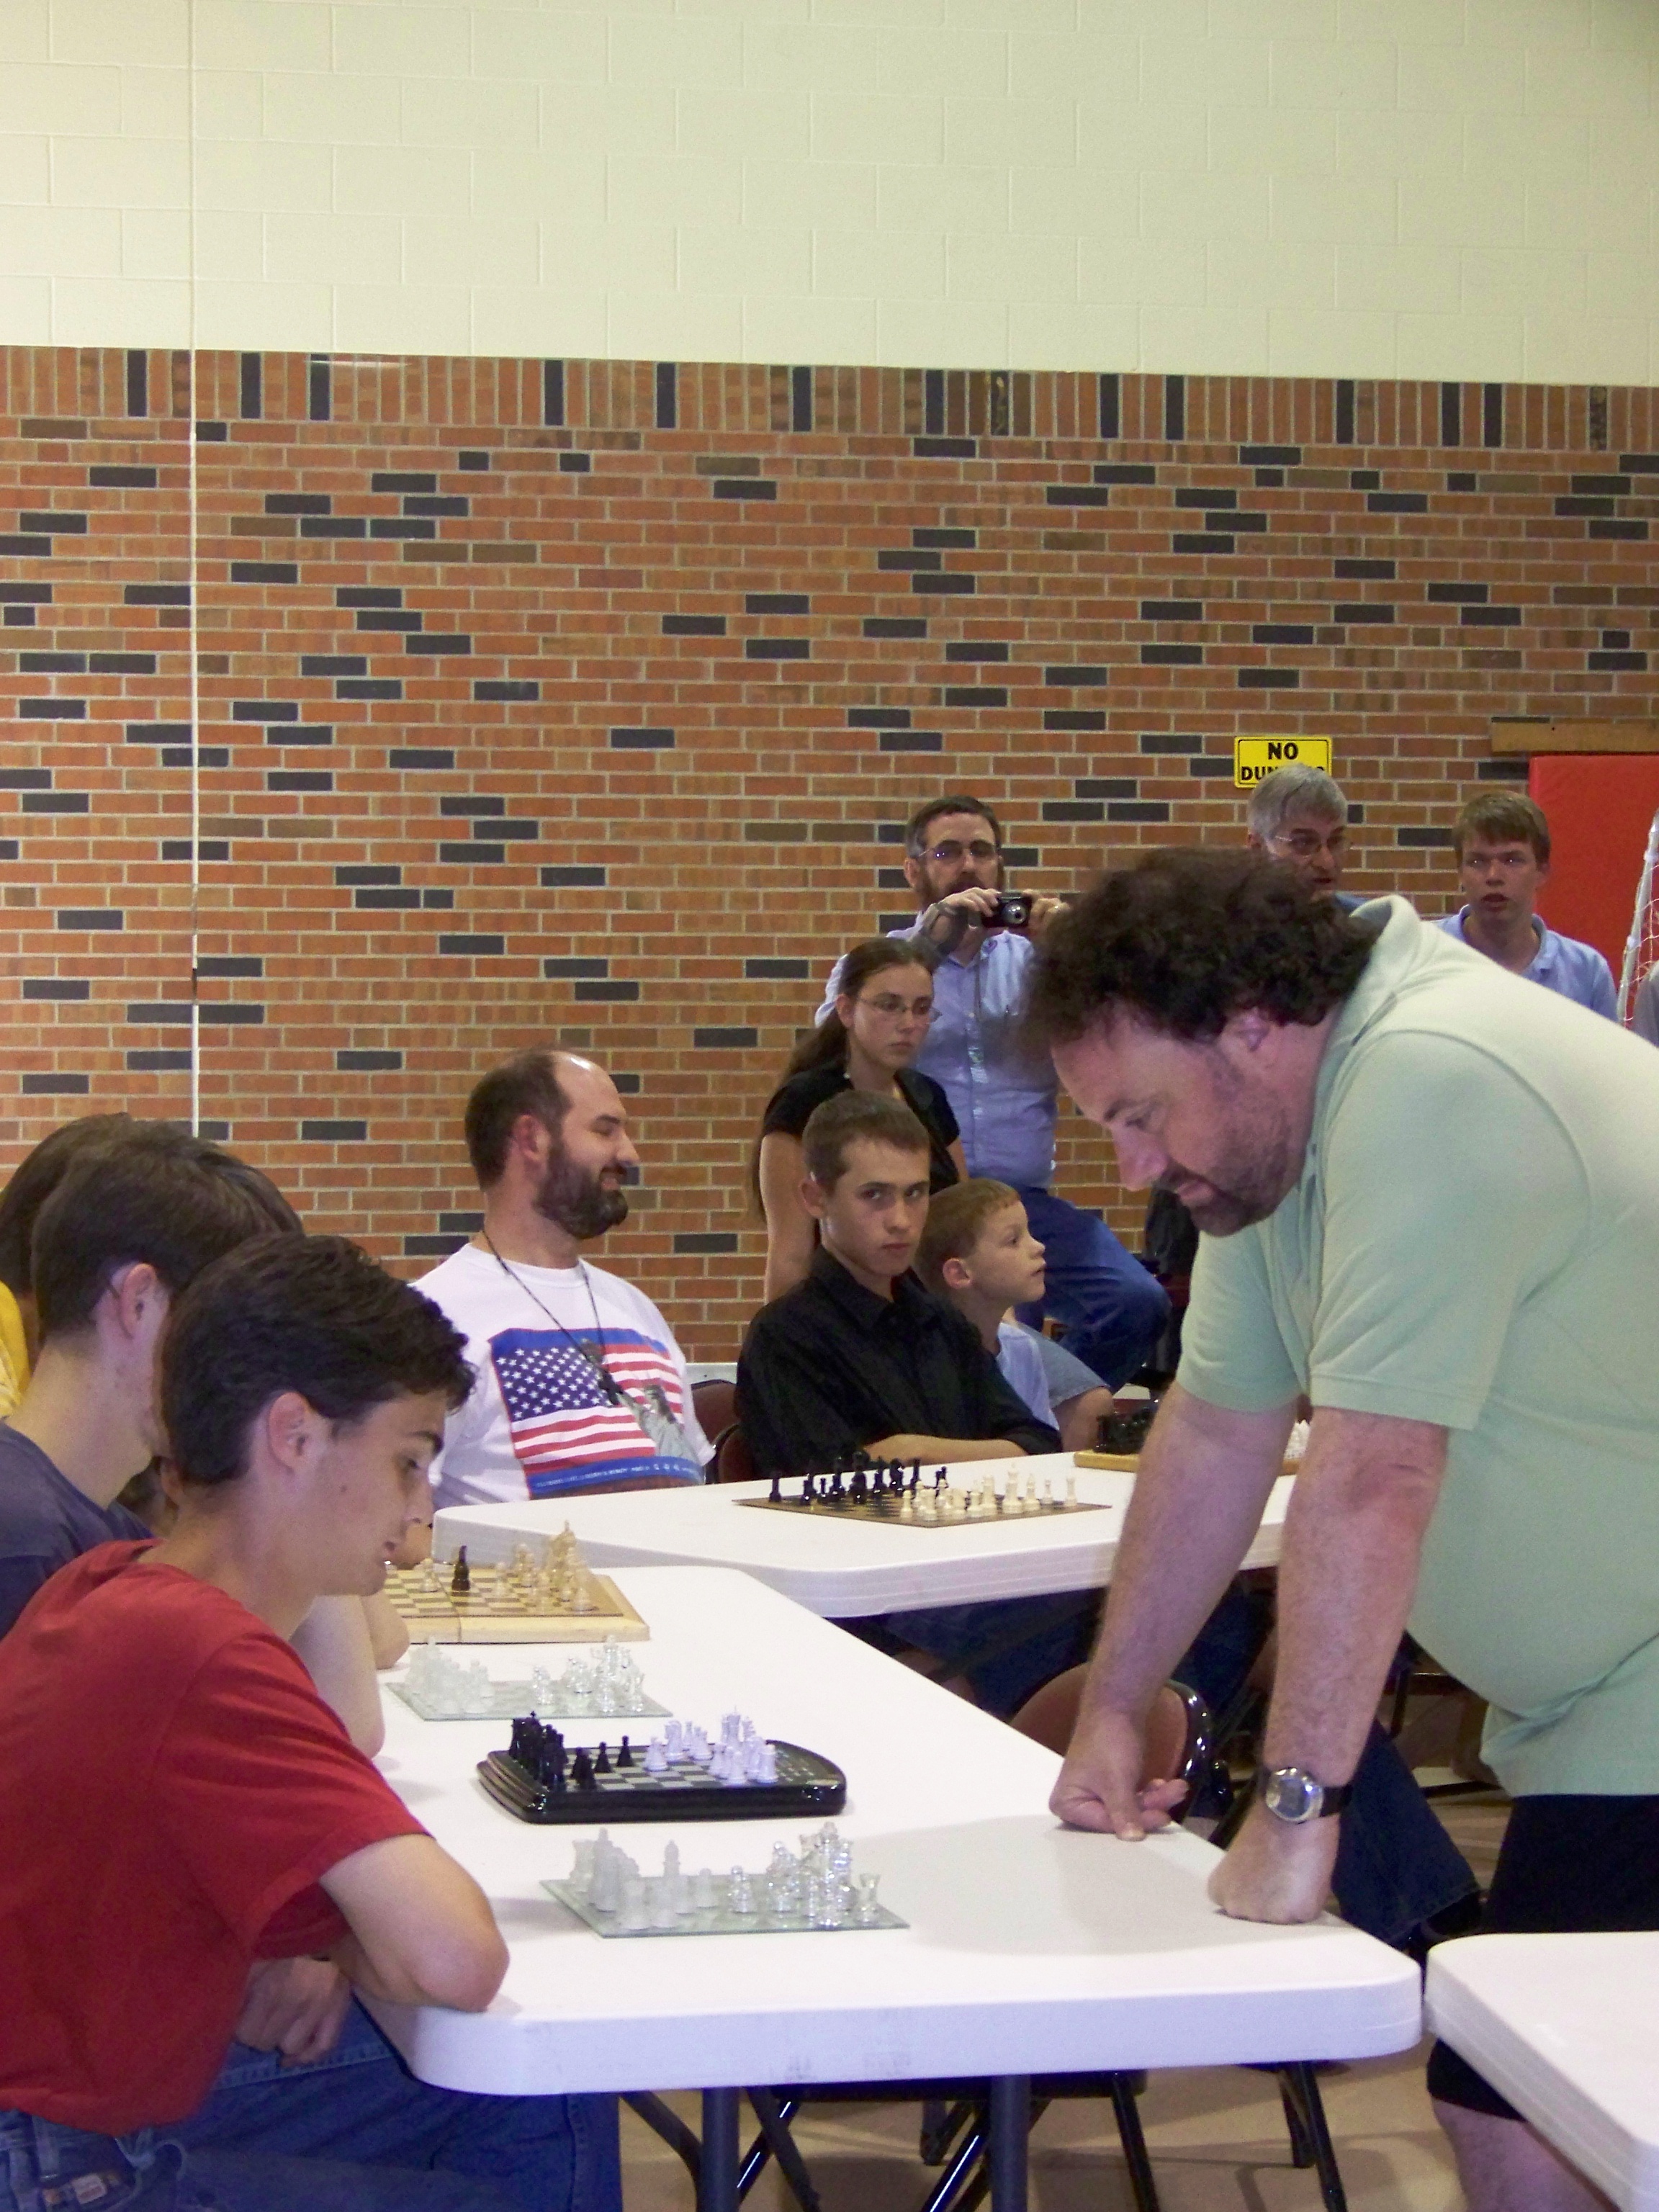 Sarfati playing chess against multiple players at a creation conference, 2011.